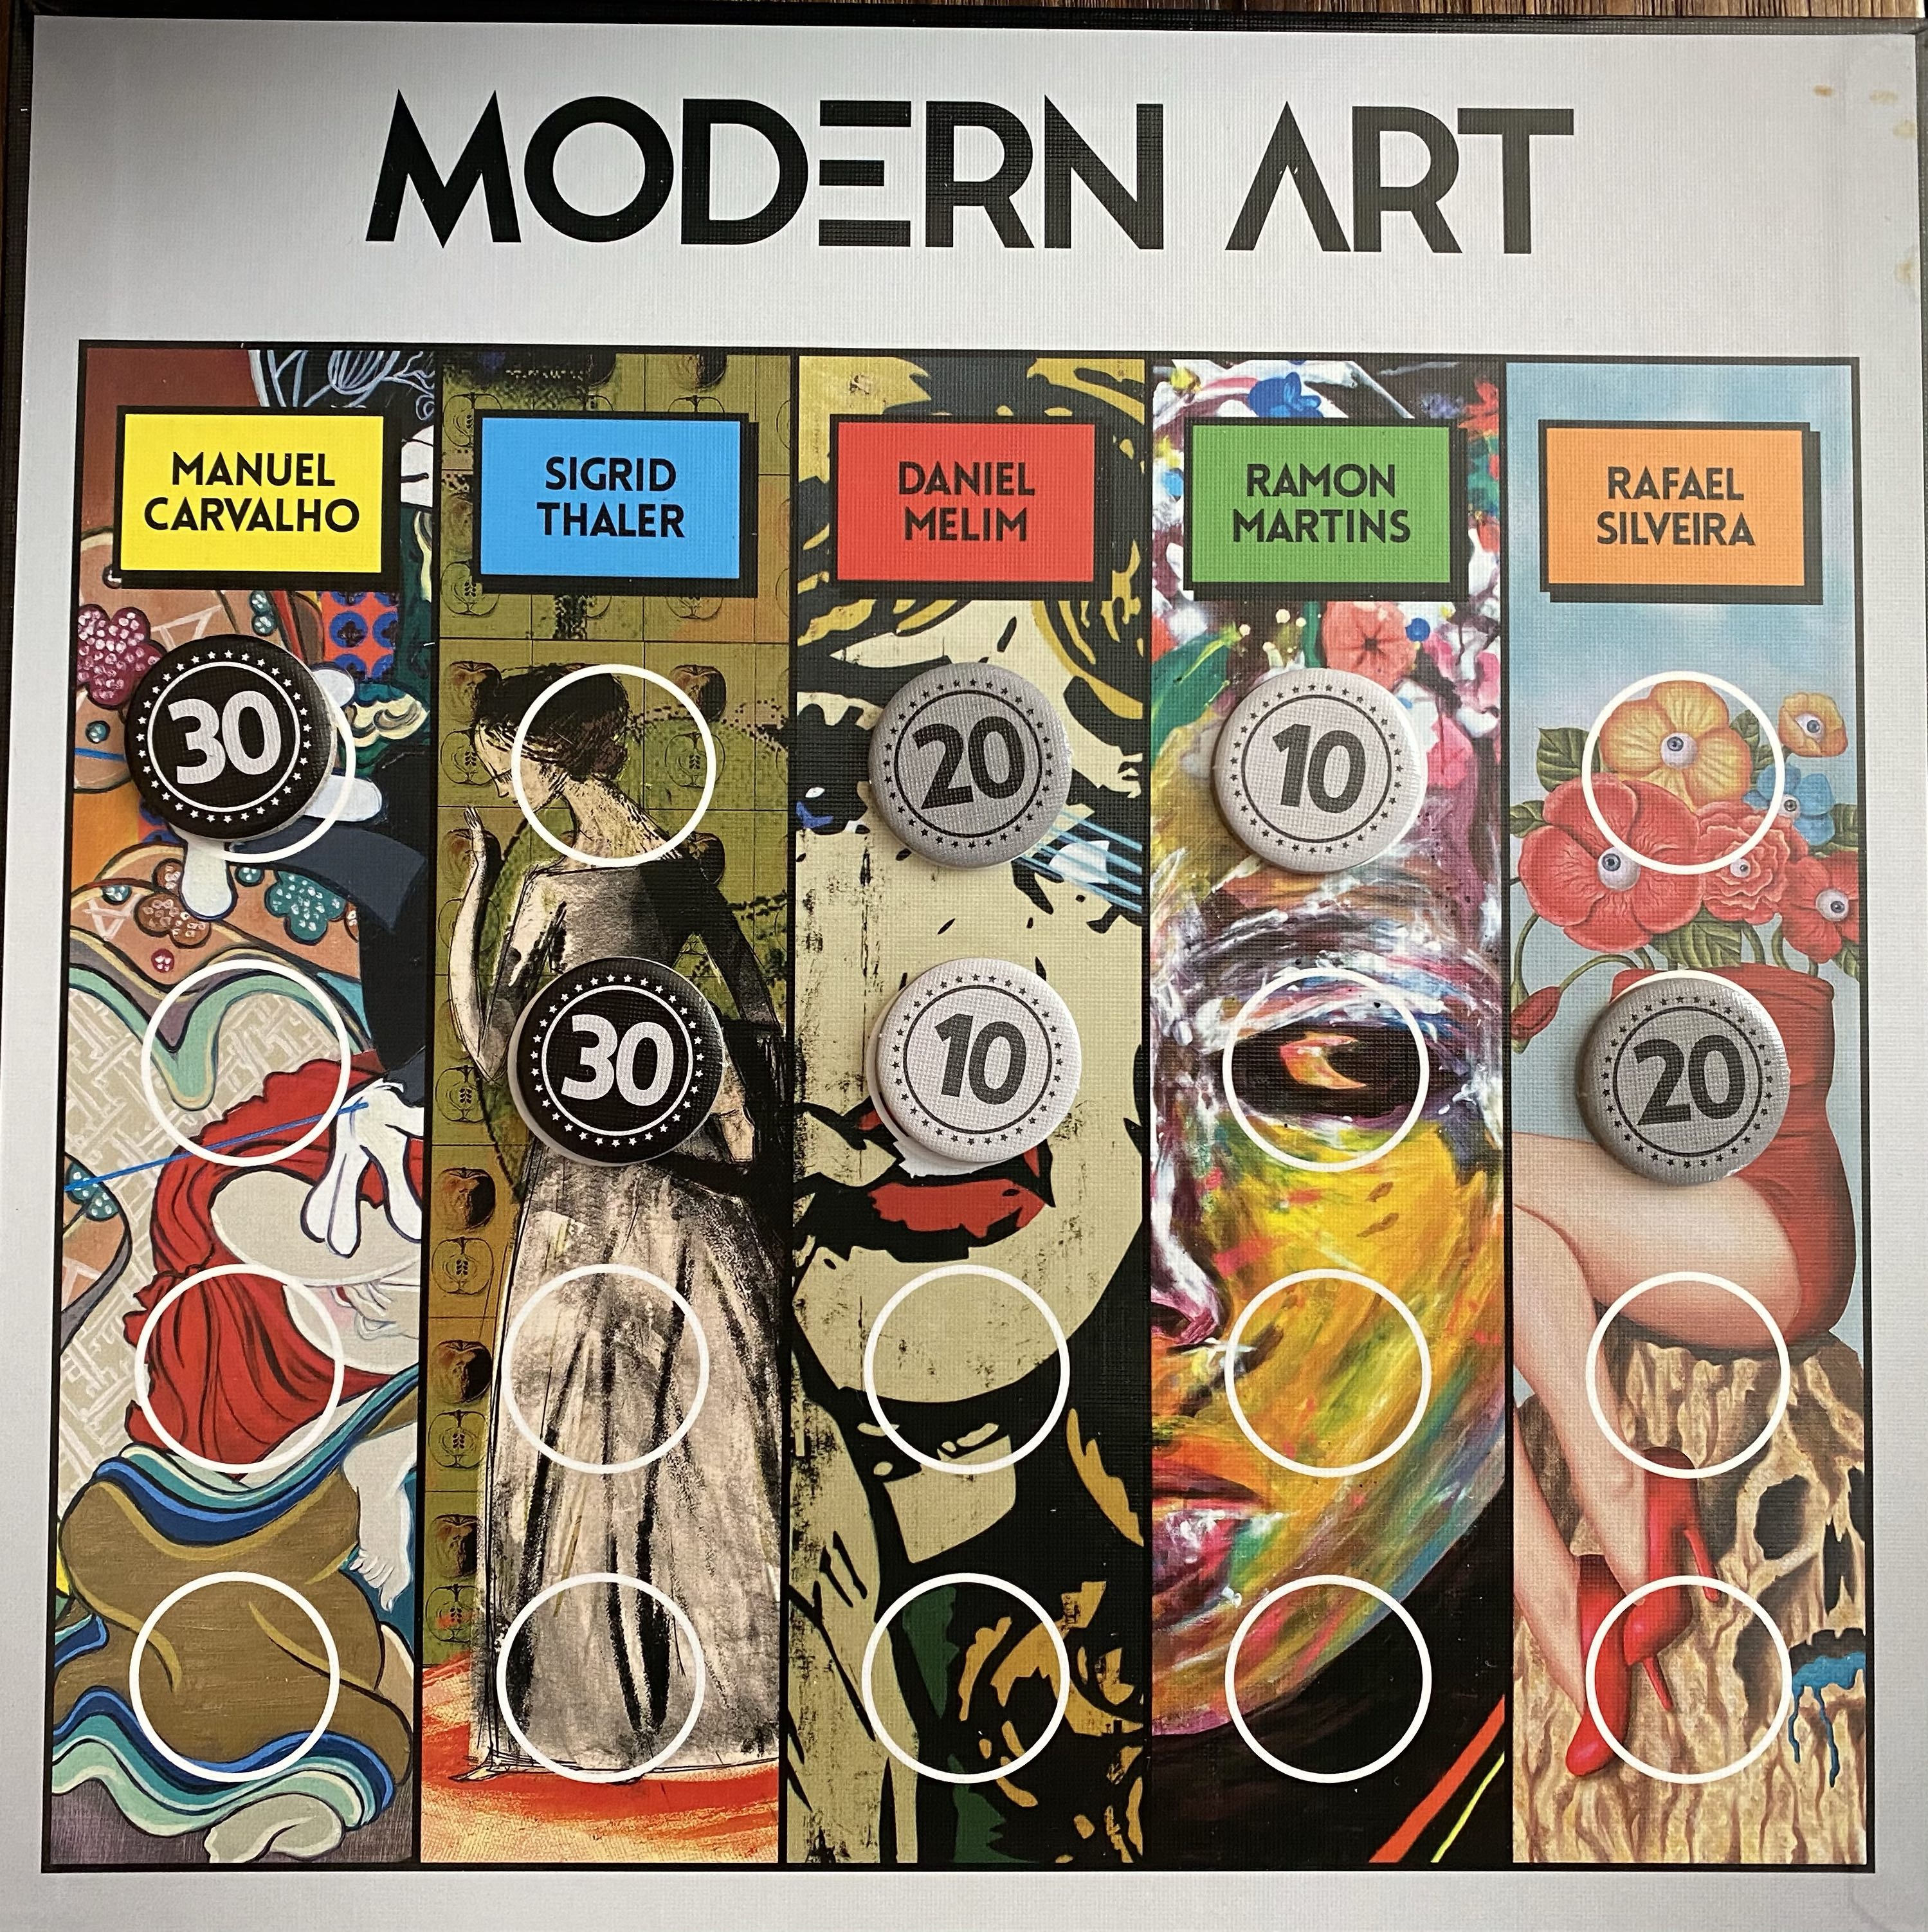 Artist value layout with the top two rows filled with corresponding tokens.